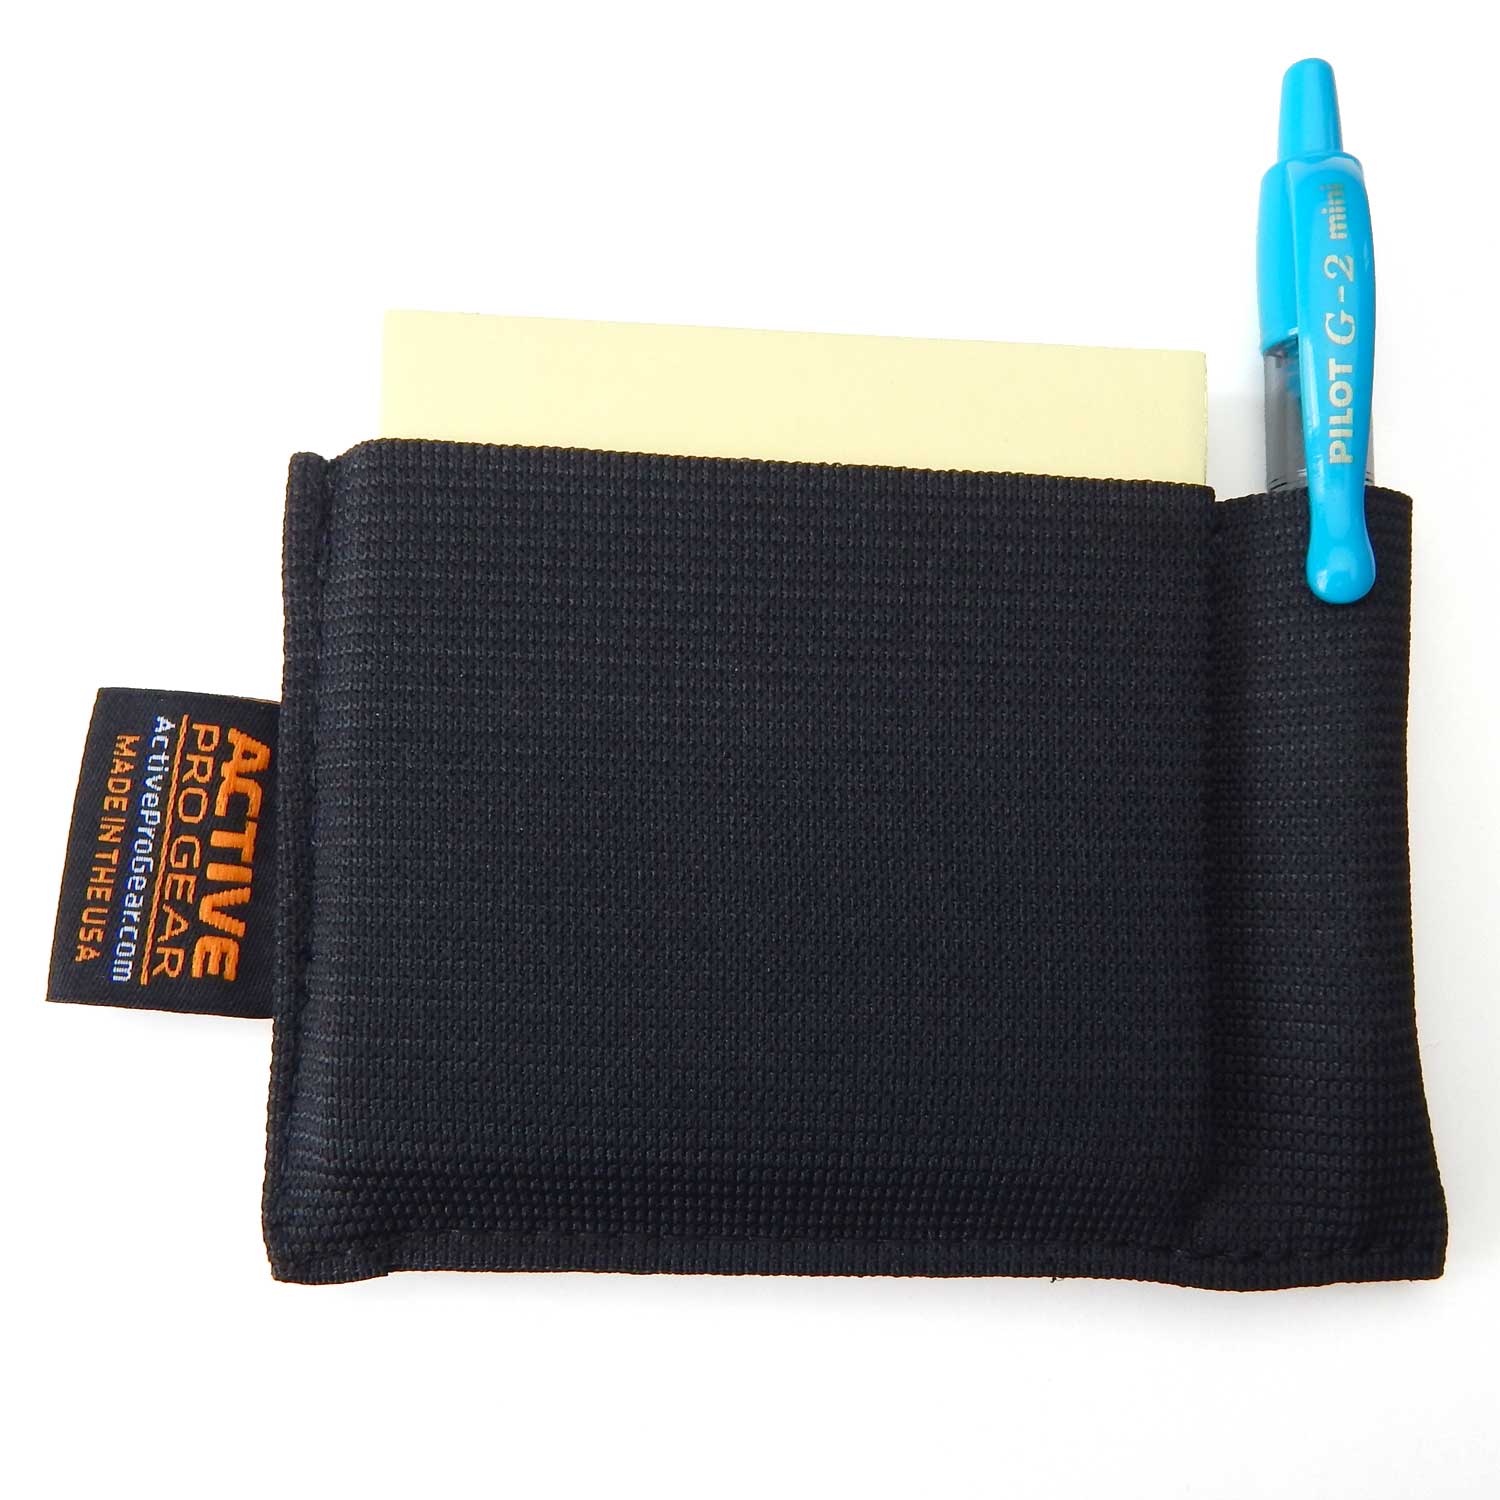 Pocket Organizer Review/Wear and Tear/Which is better? Epi VS